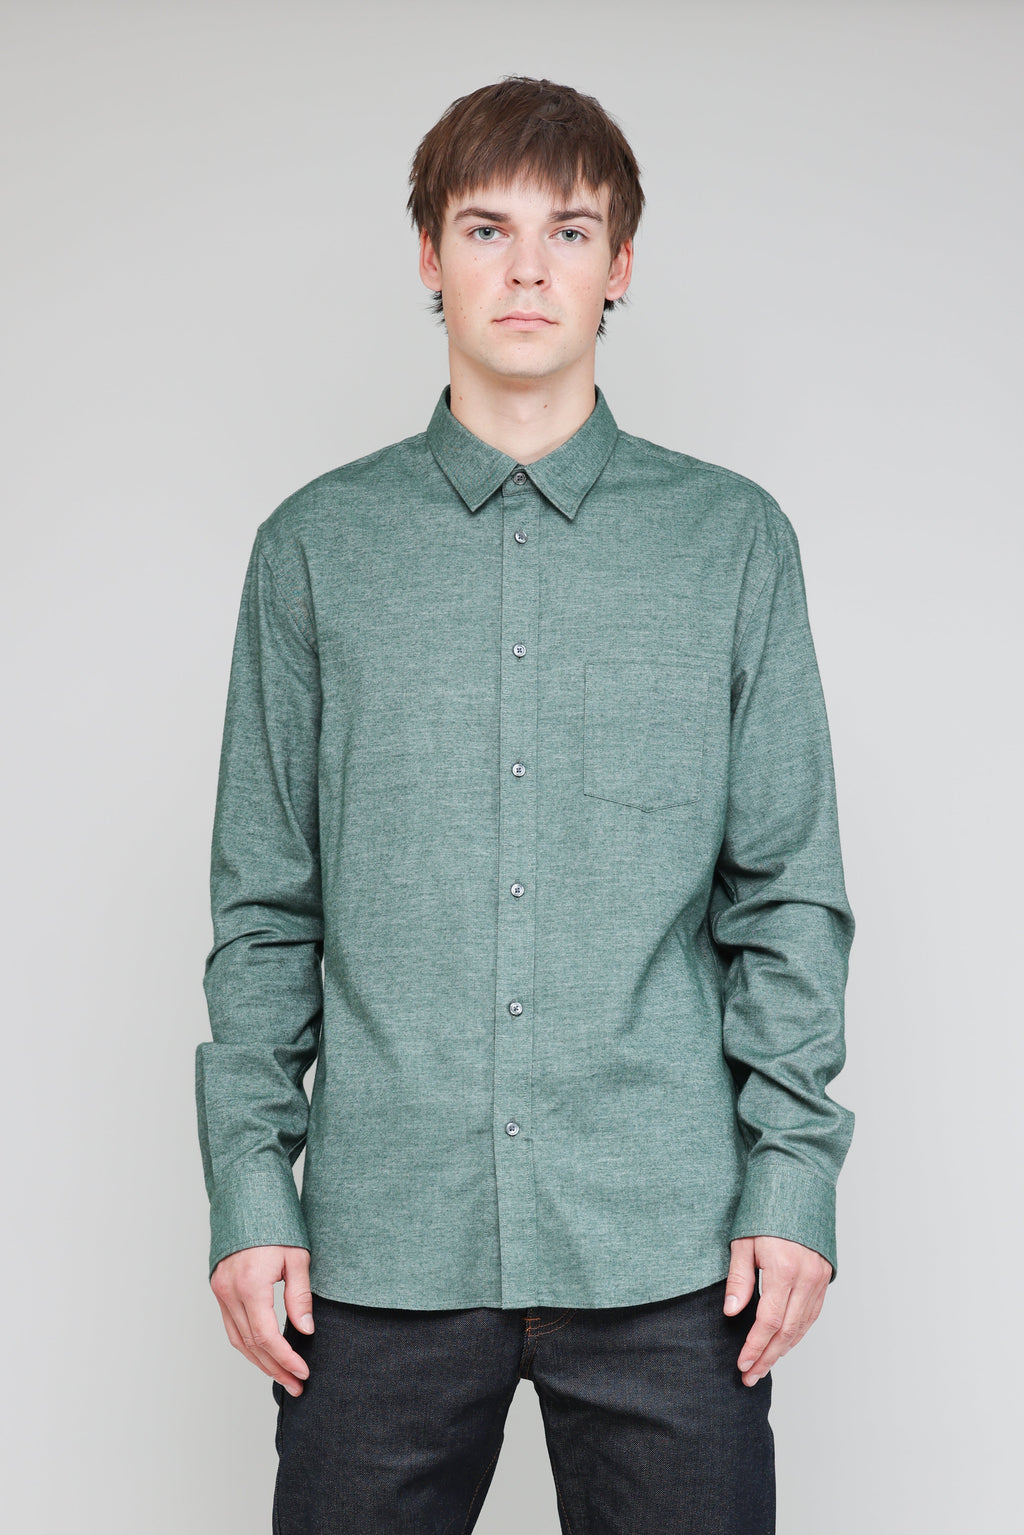 Japanese Brushed Twill in Green 02